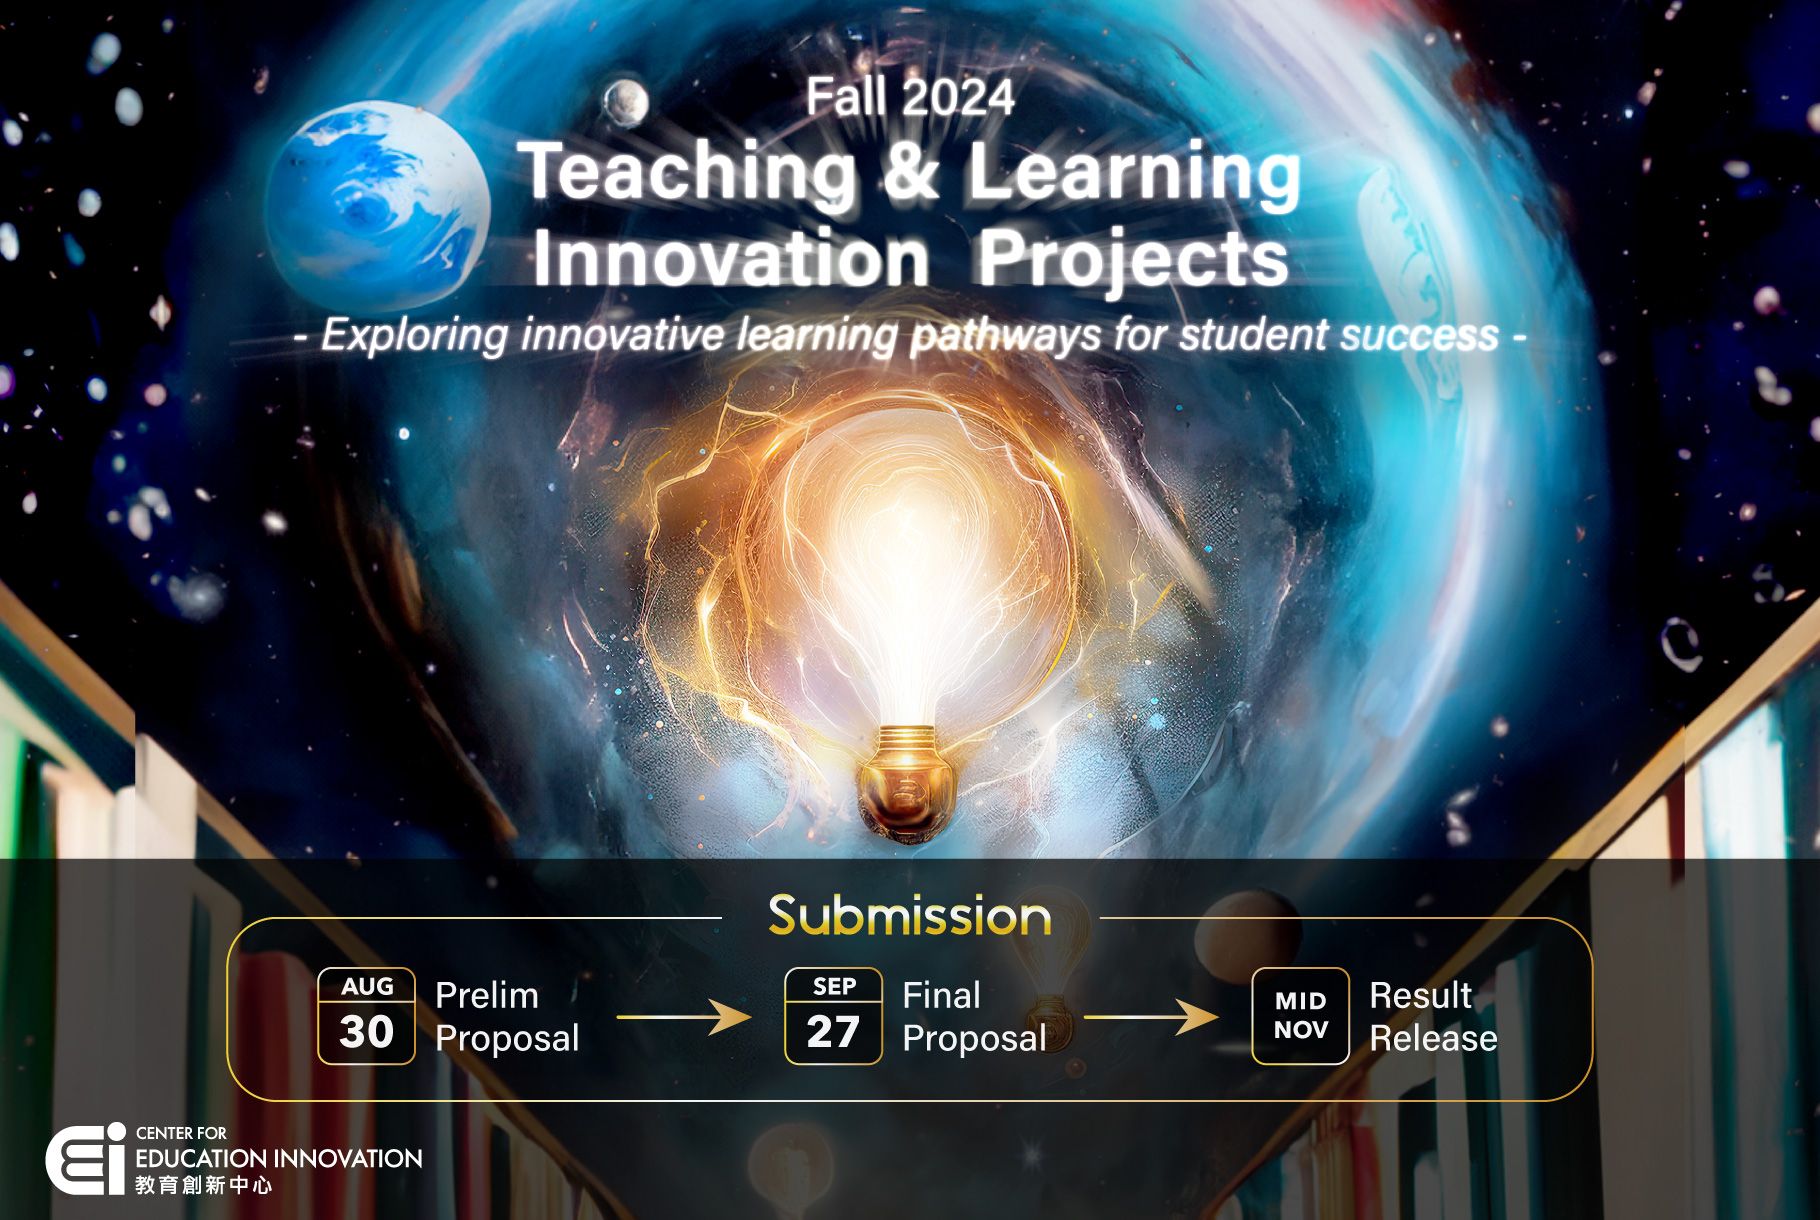 Teaching and Learning Innovation Projects (TLIP) CALL FOR PROPOSALS - FALL 2024